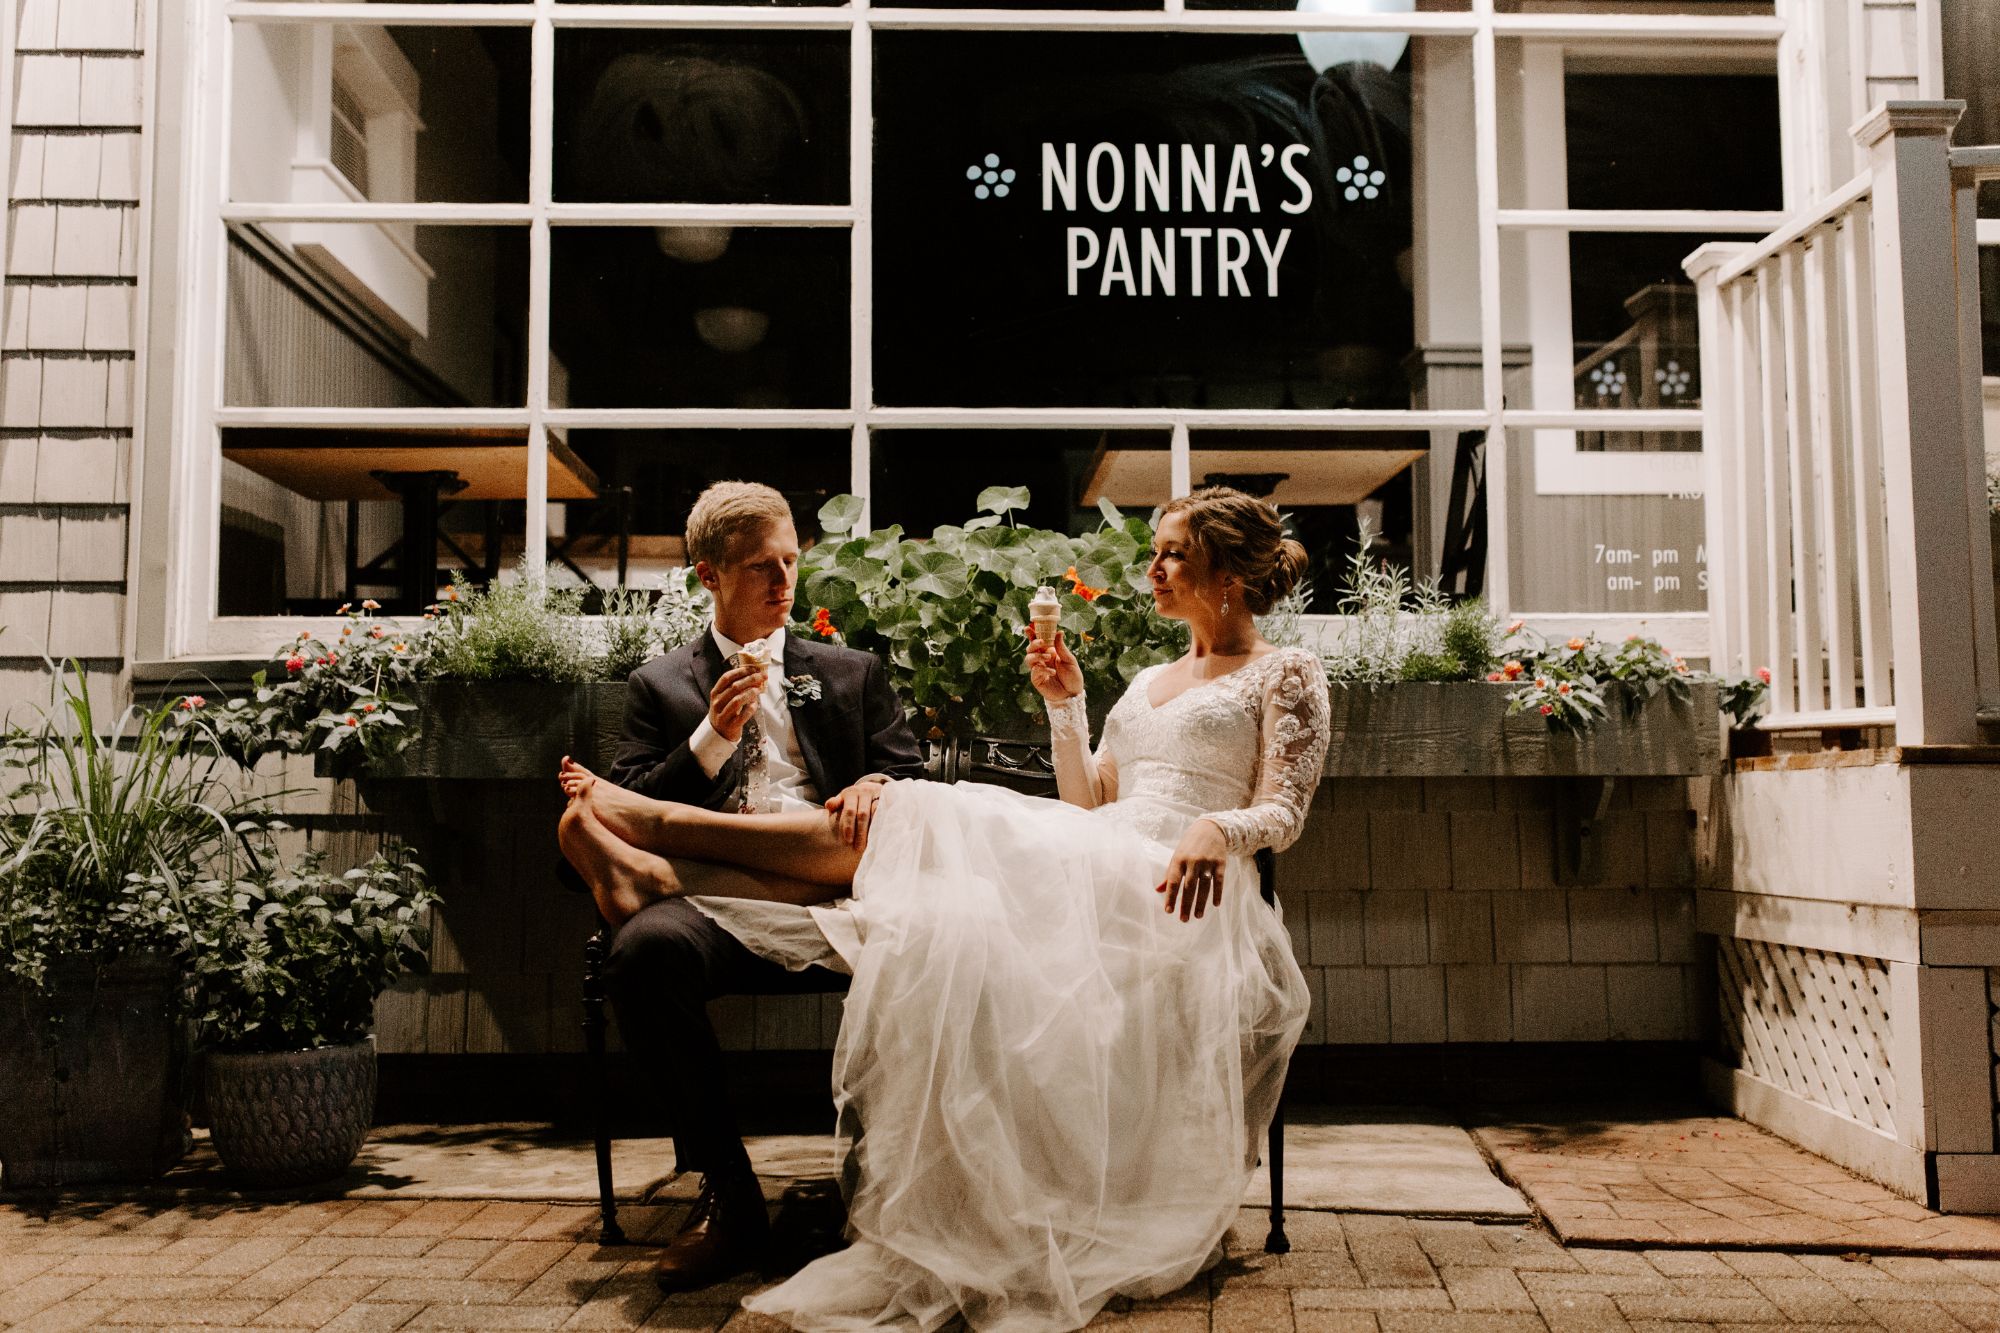 Newlywed bride and groom sitting on a cafe bench eating icecream.